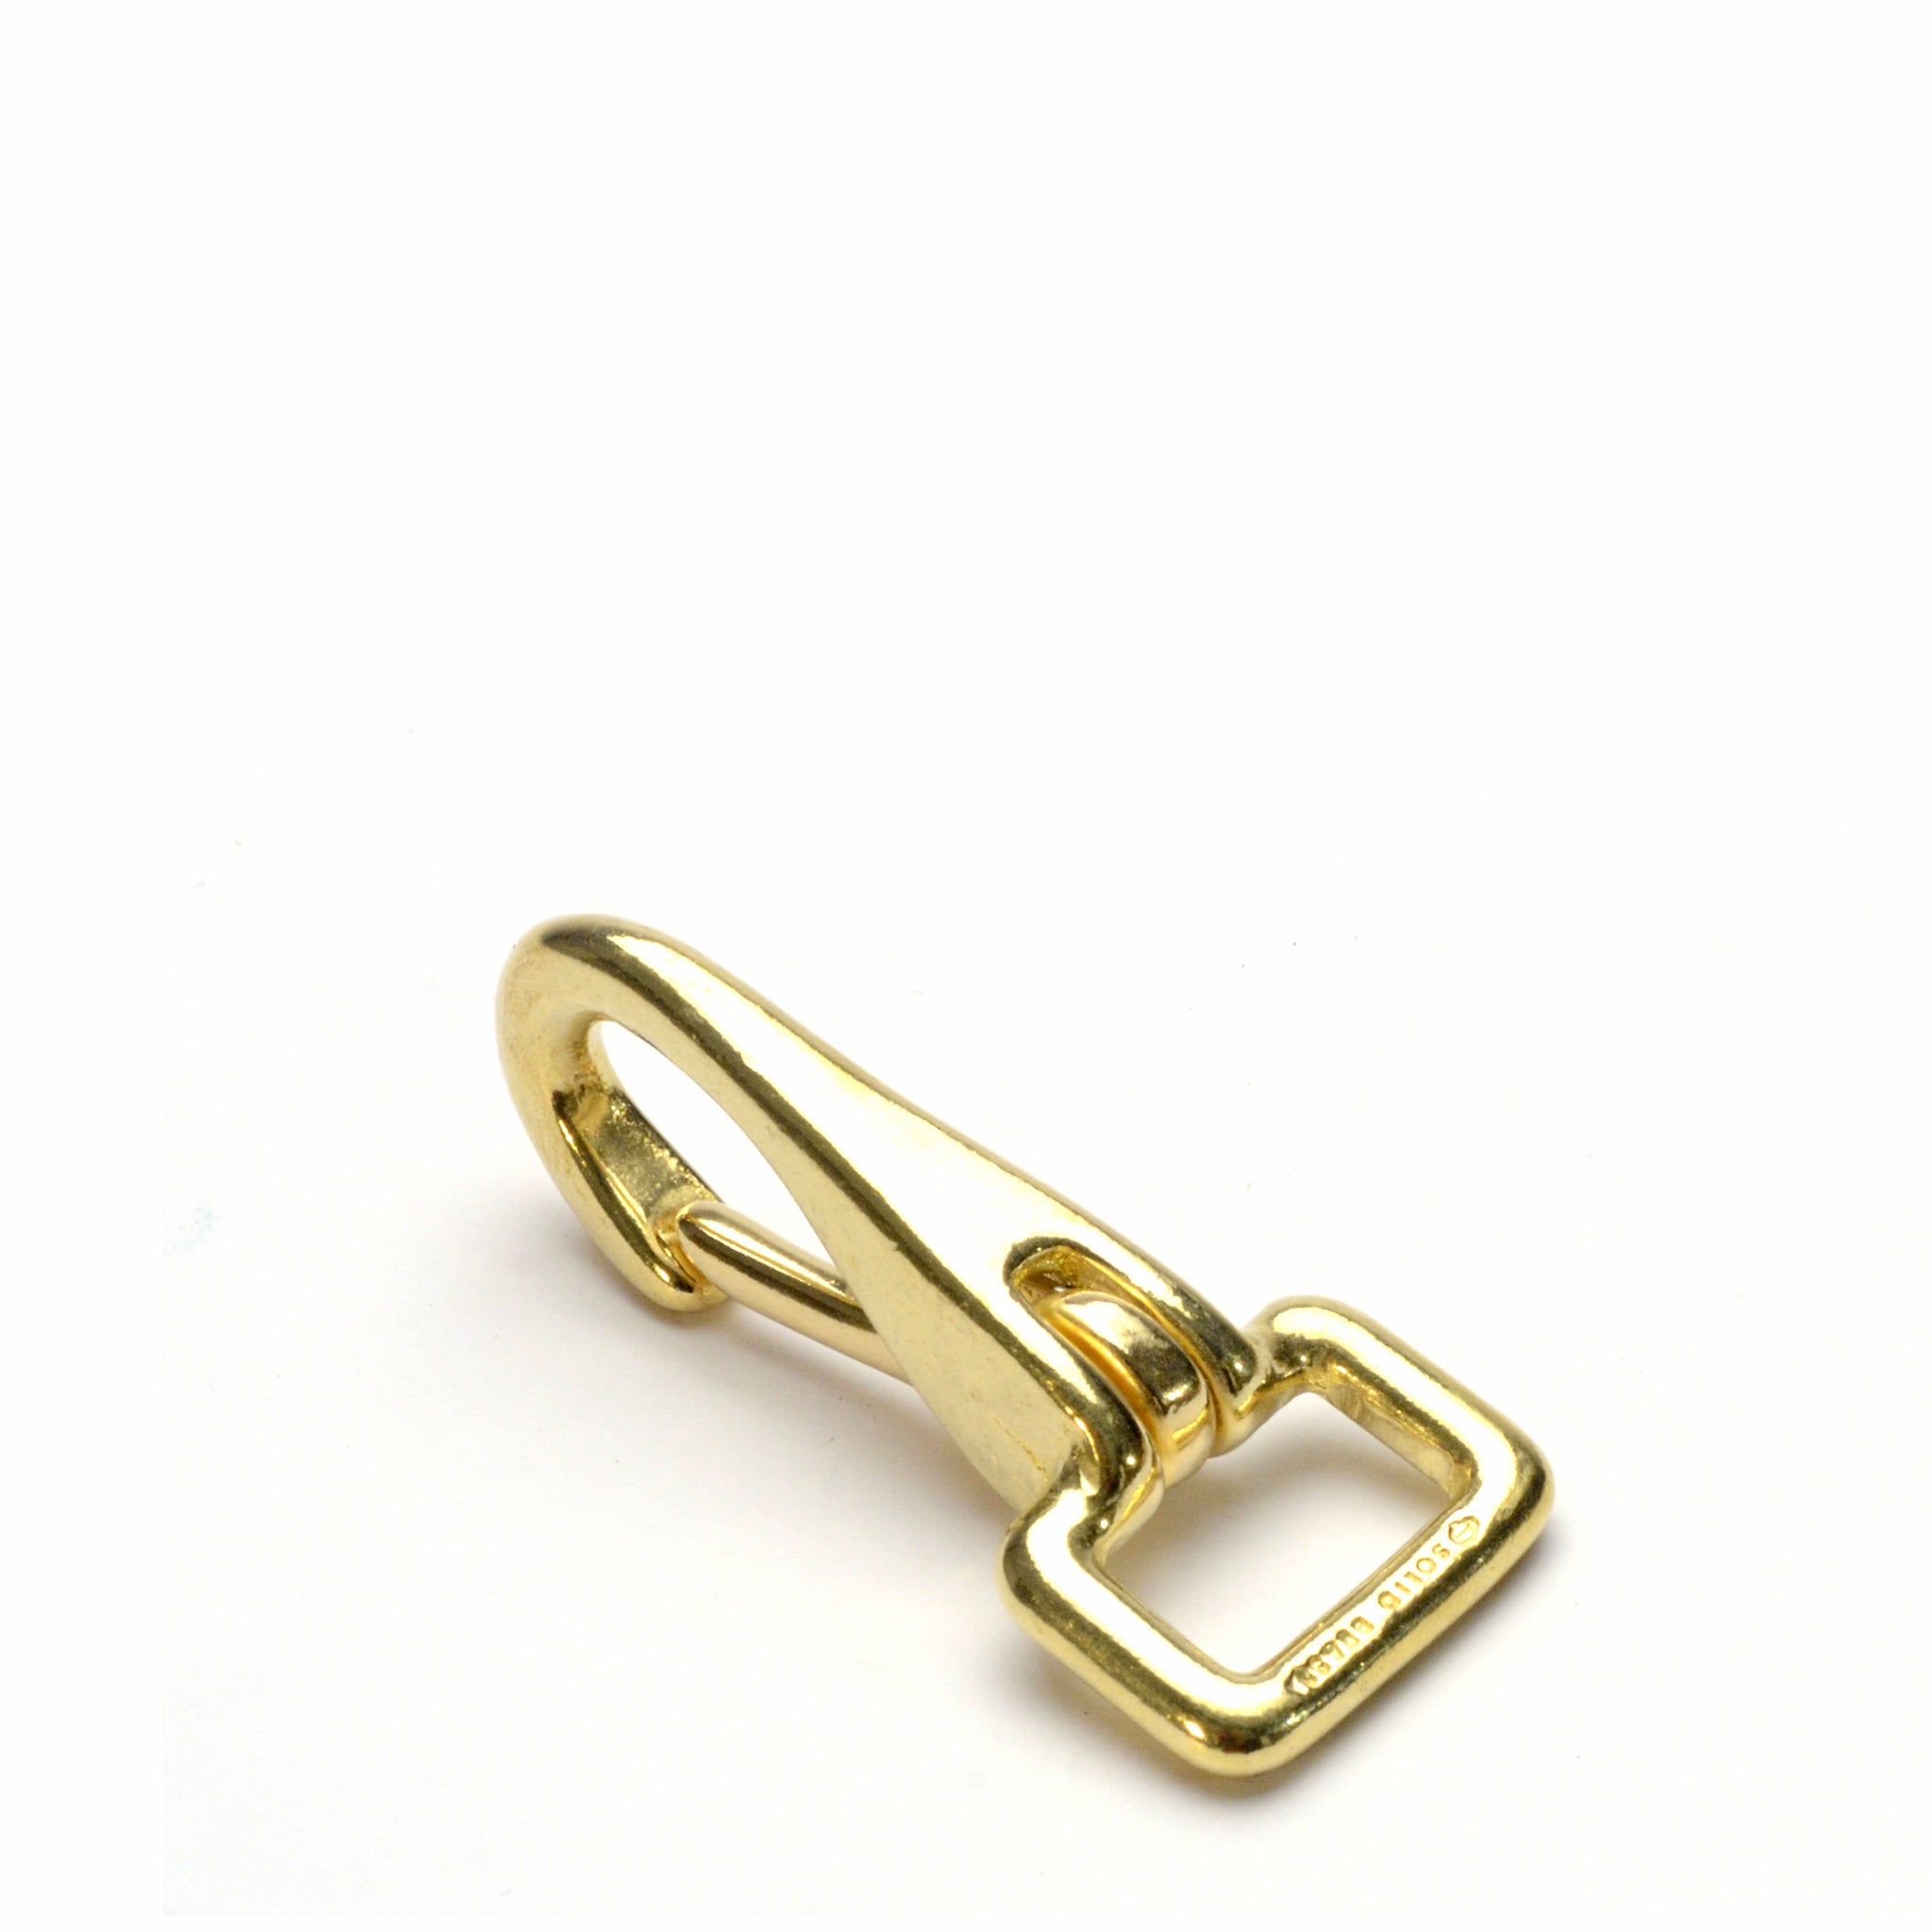 19mm Solid Brass Halter Snap from Identity Leathercraft